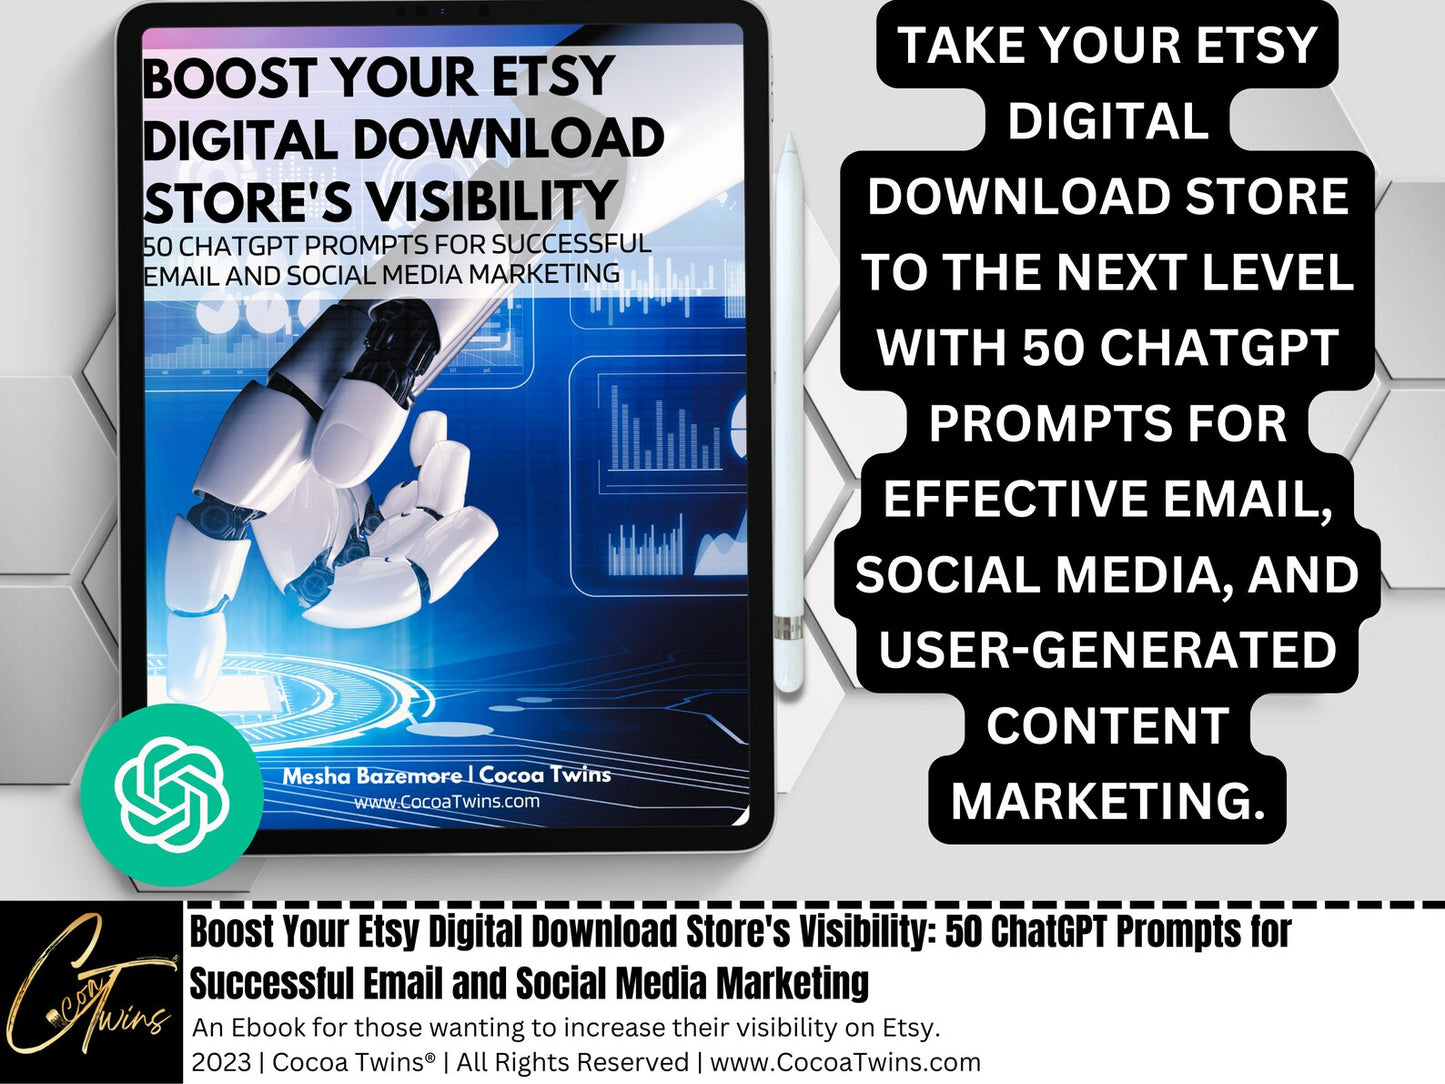 Boost Your Etsy Digital Download Store's Visibility-50 ChatGPT Prompts for Successful Email and Social Media Marketing Ebook | PDF Download